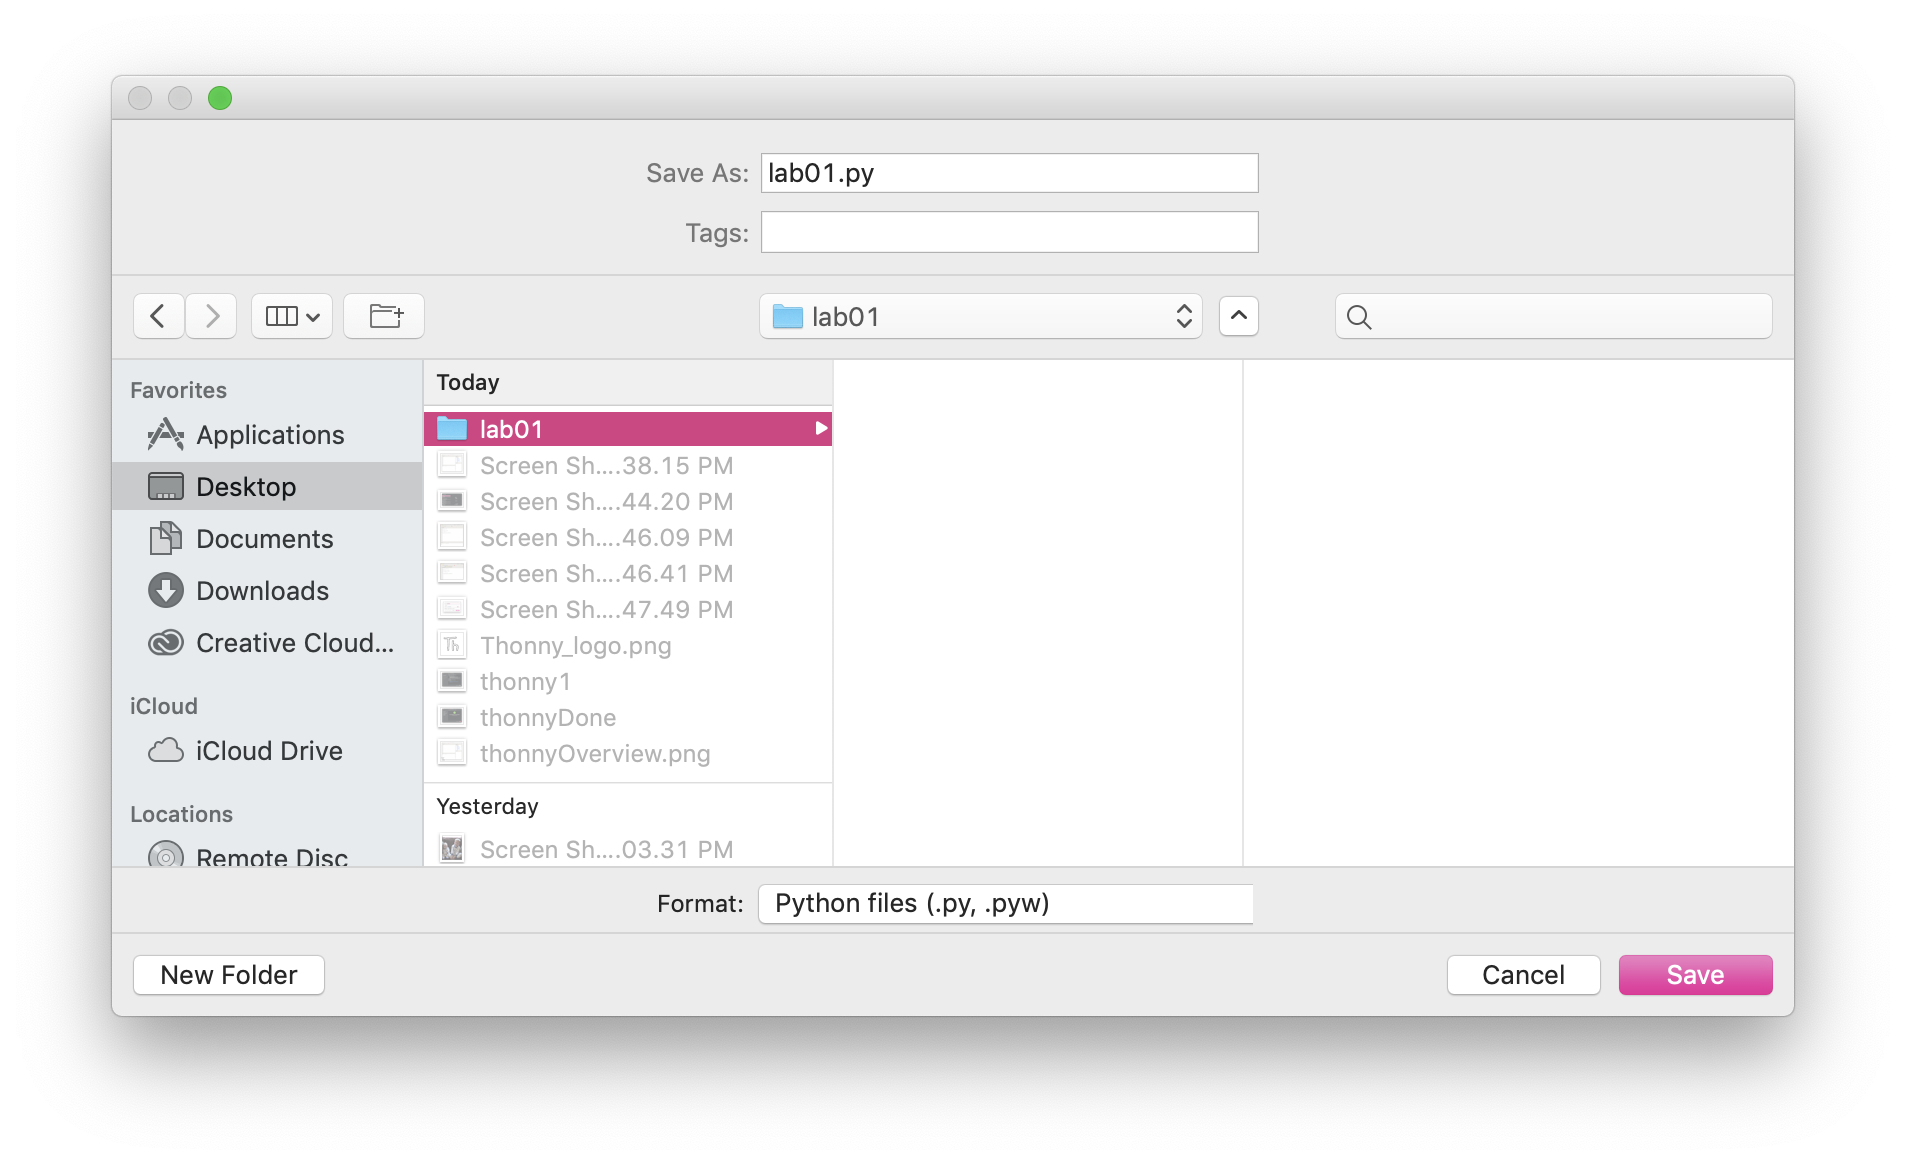 The expanded save-as dialog allowing detailed selection of a destination folder. This is the standard save-as dialog for a Mac.